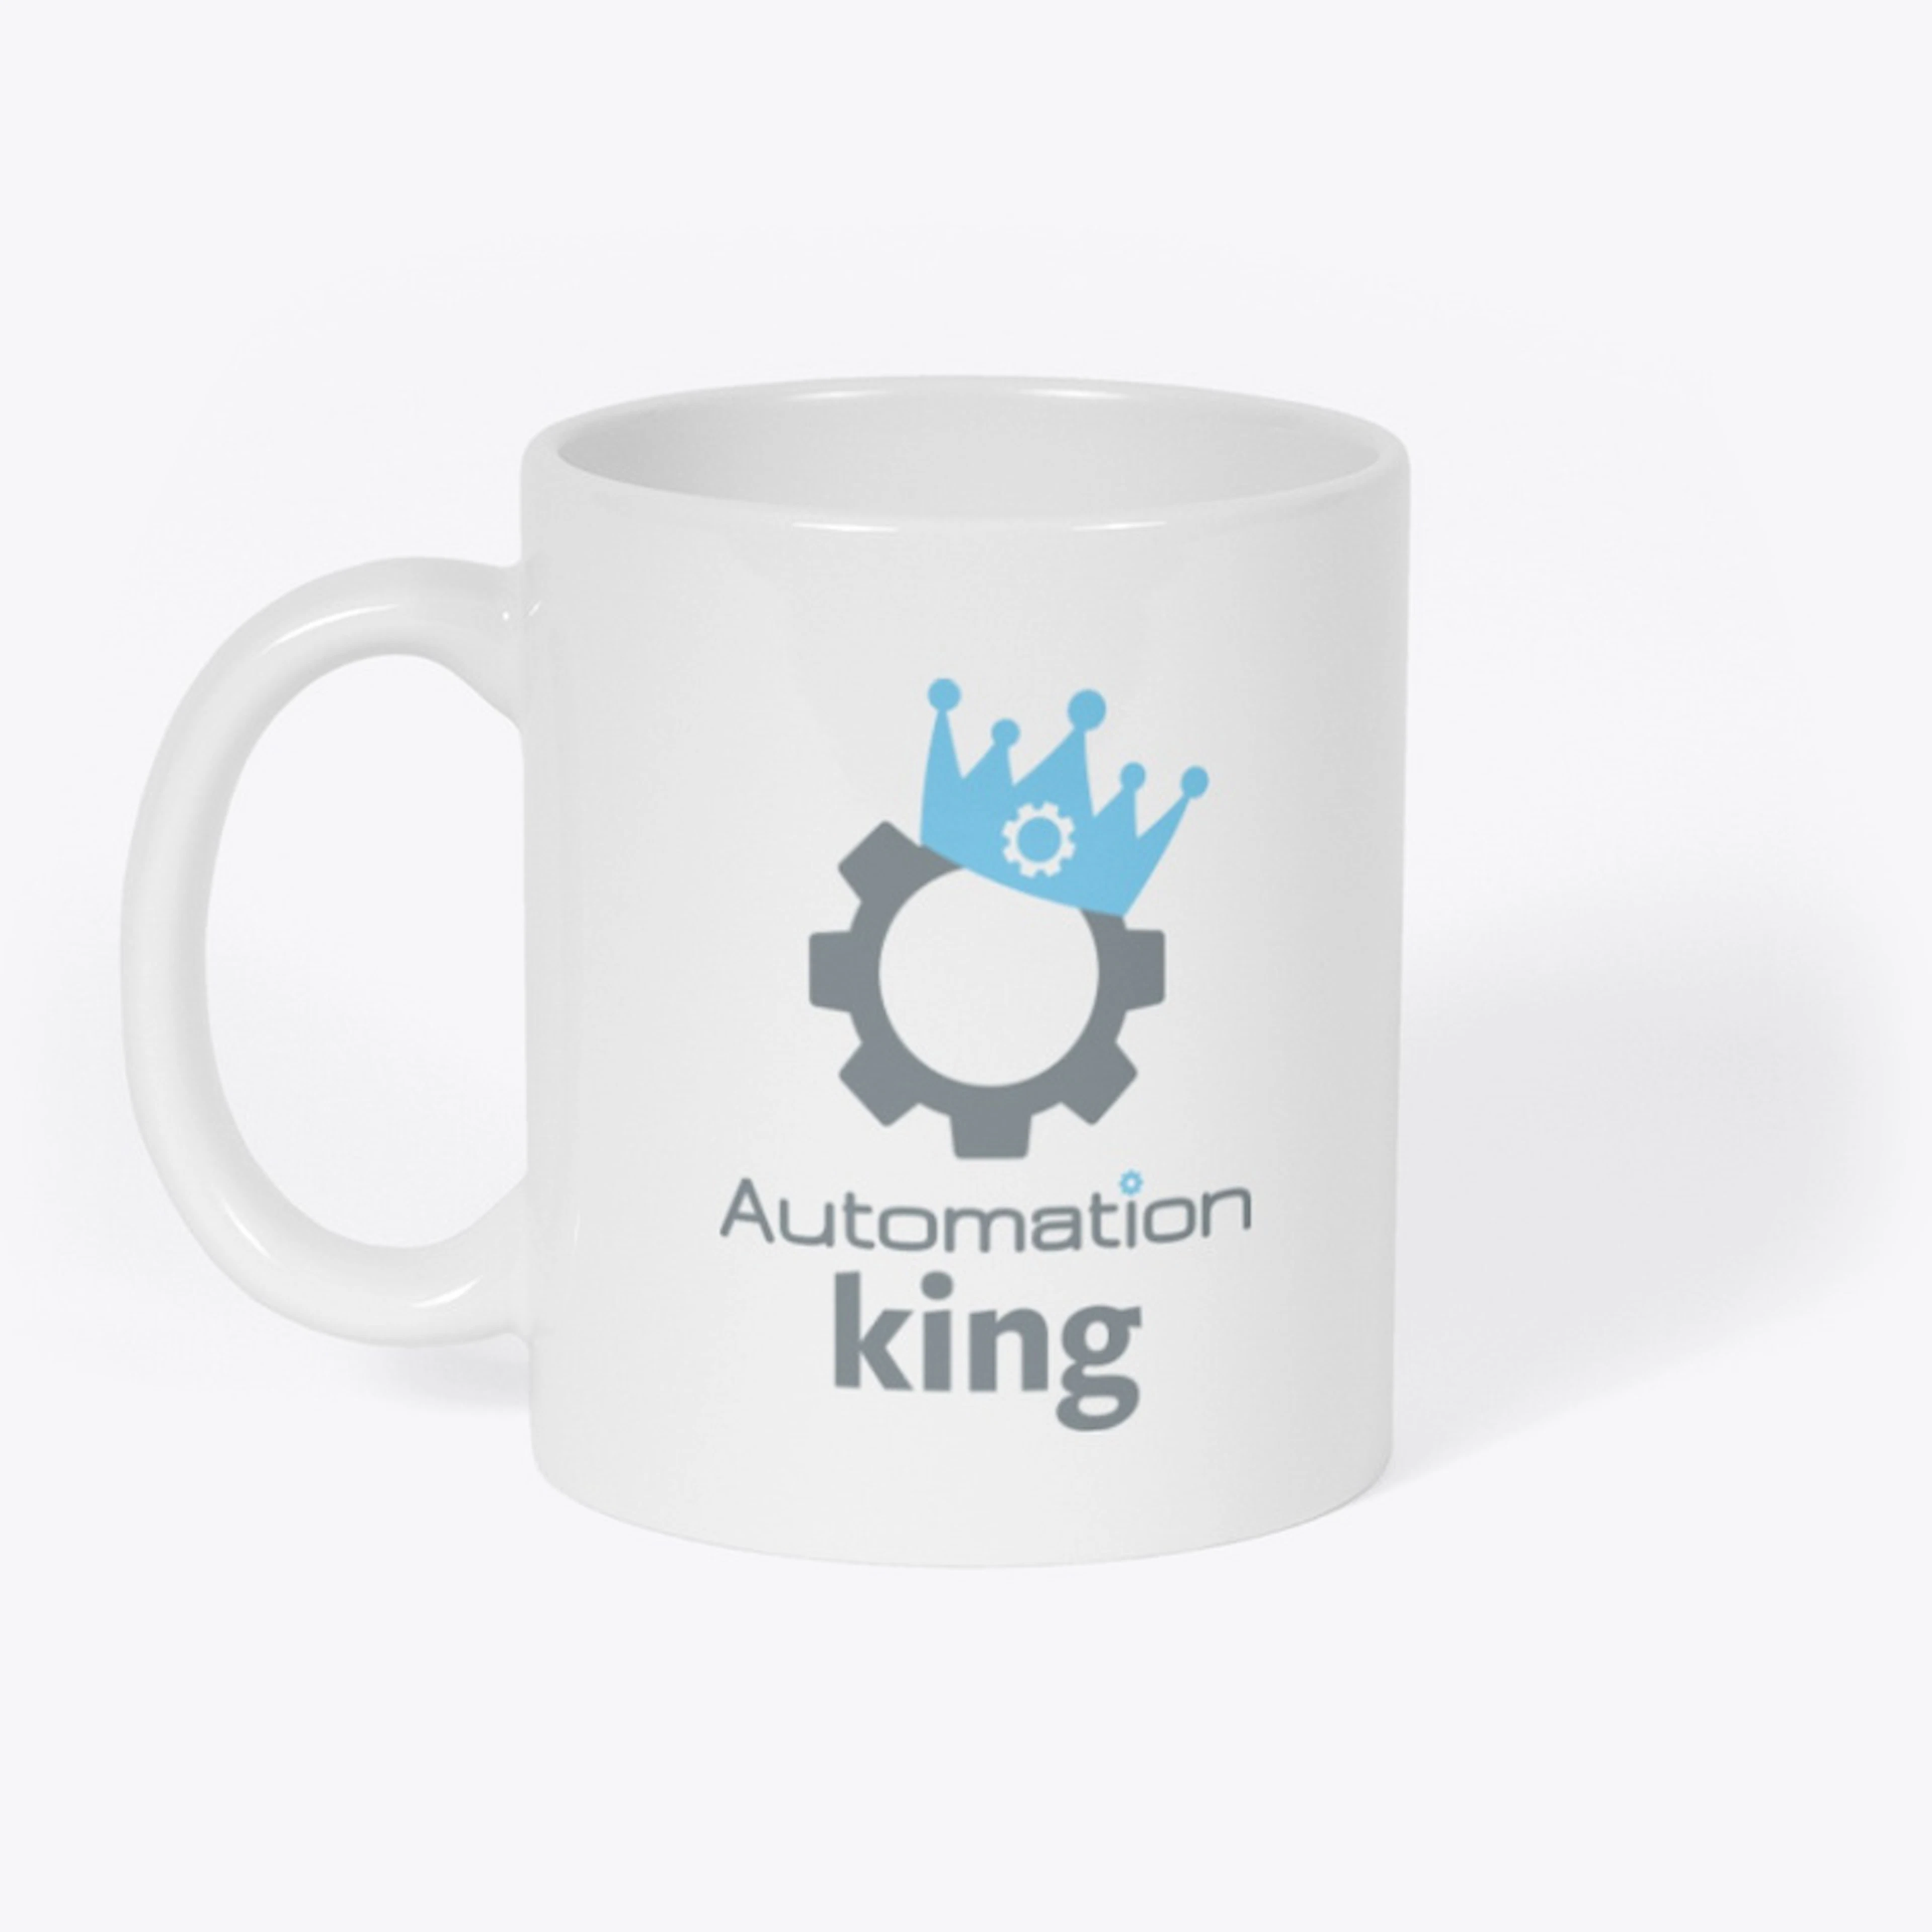 Automation king